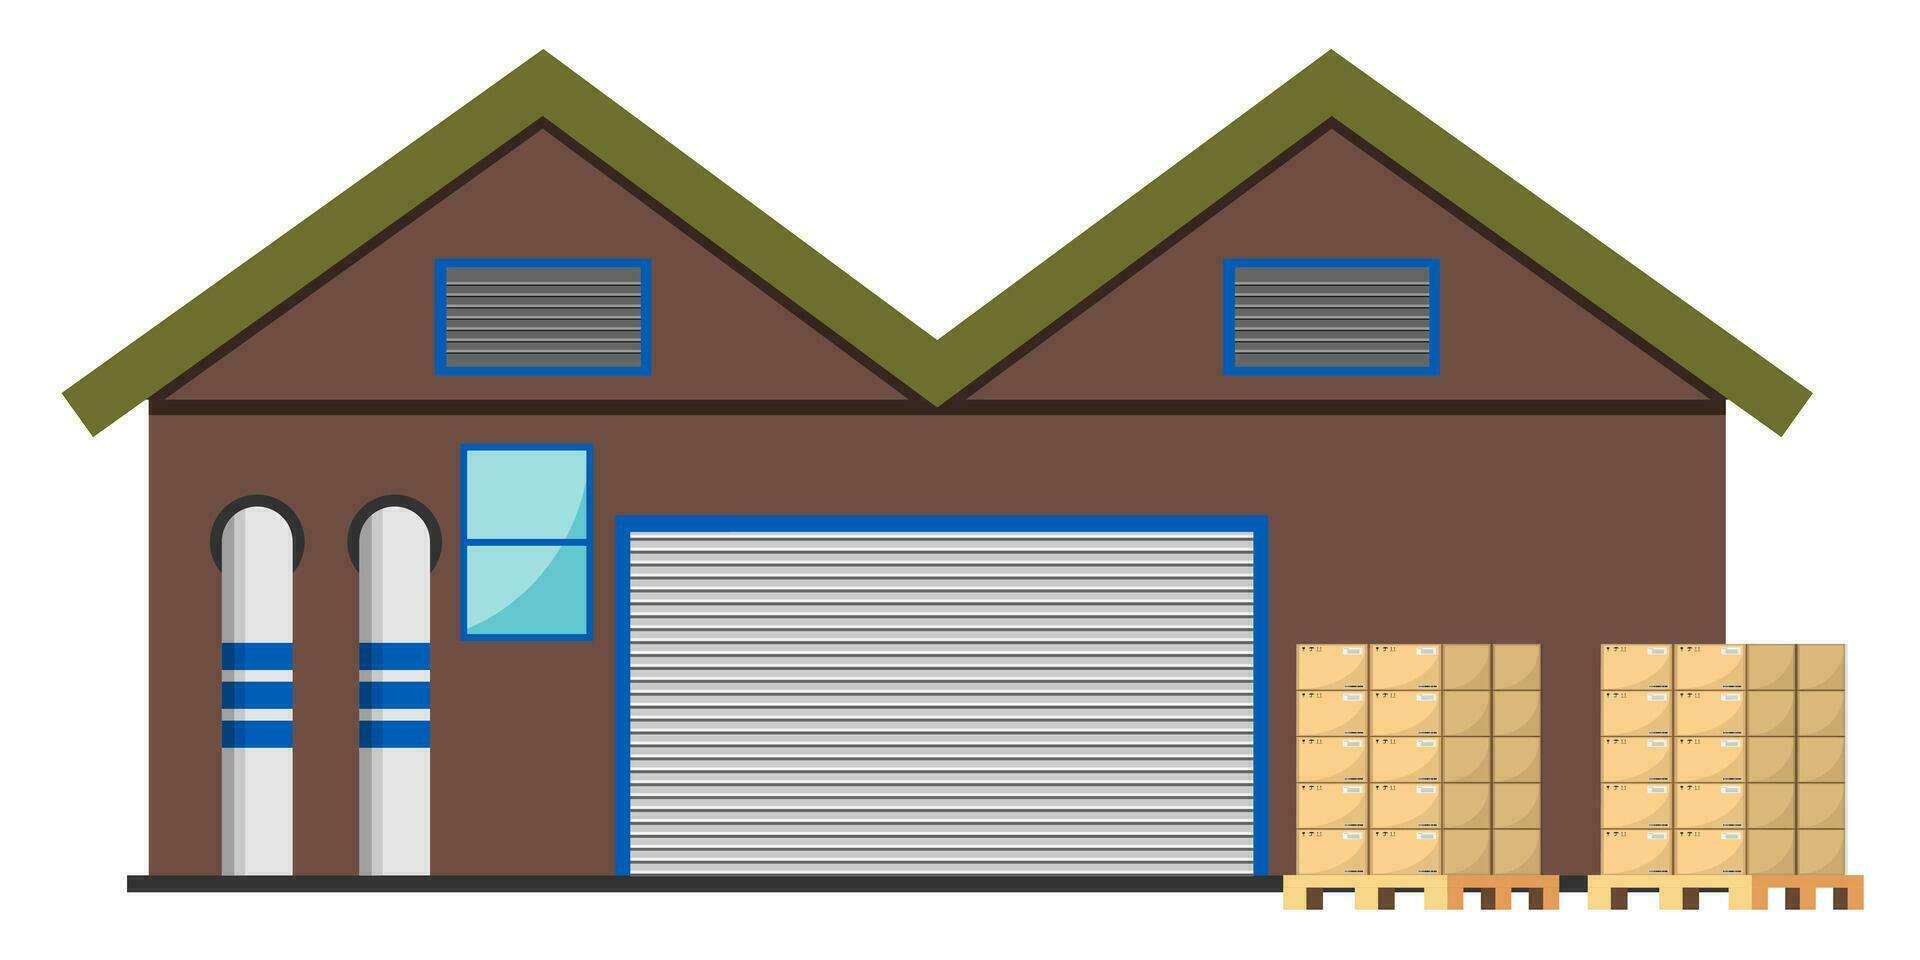 Warehouse industry with storage buildings. Vector illustration isolated on white background. eps10